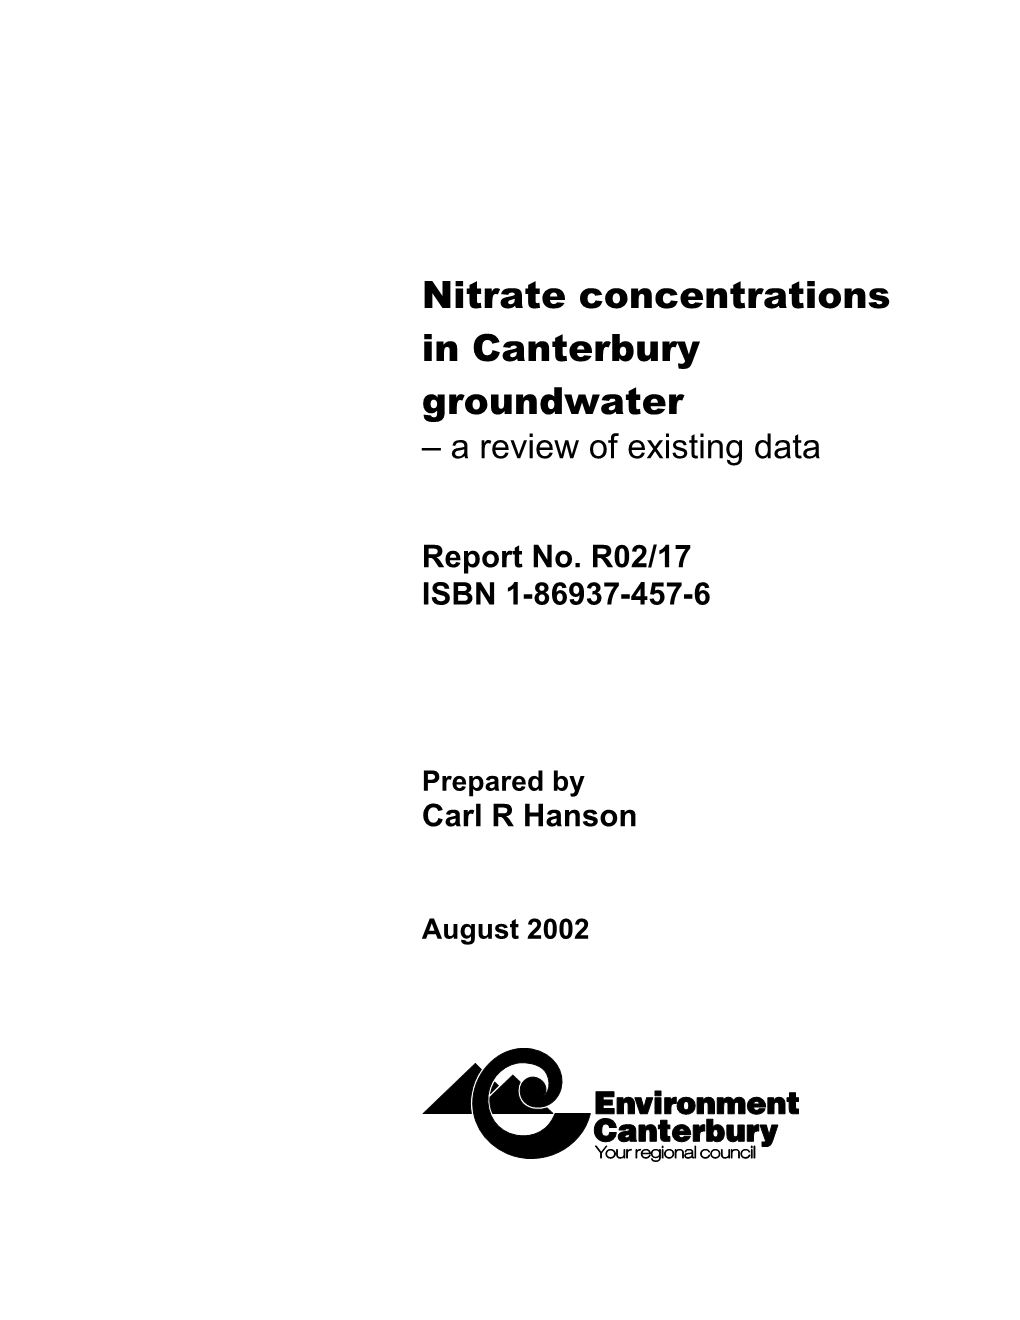 Nitrate Concentrations in Canterbury Groundwater – a Review of Existing Data